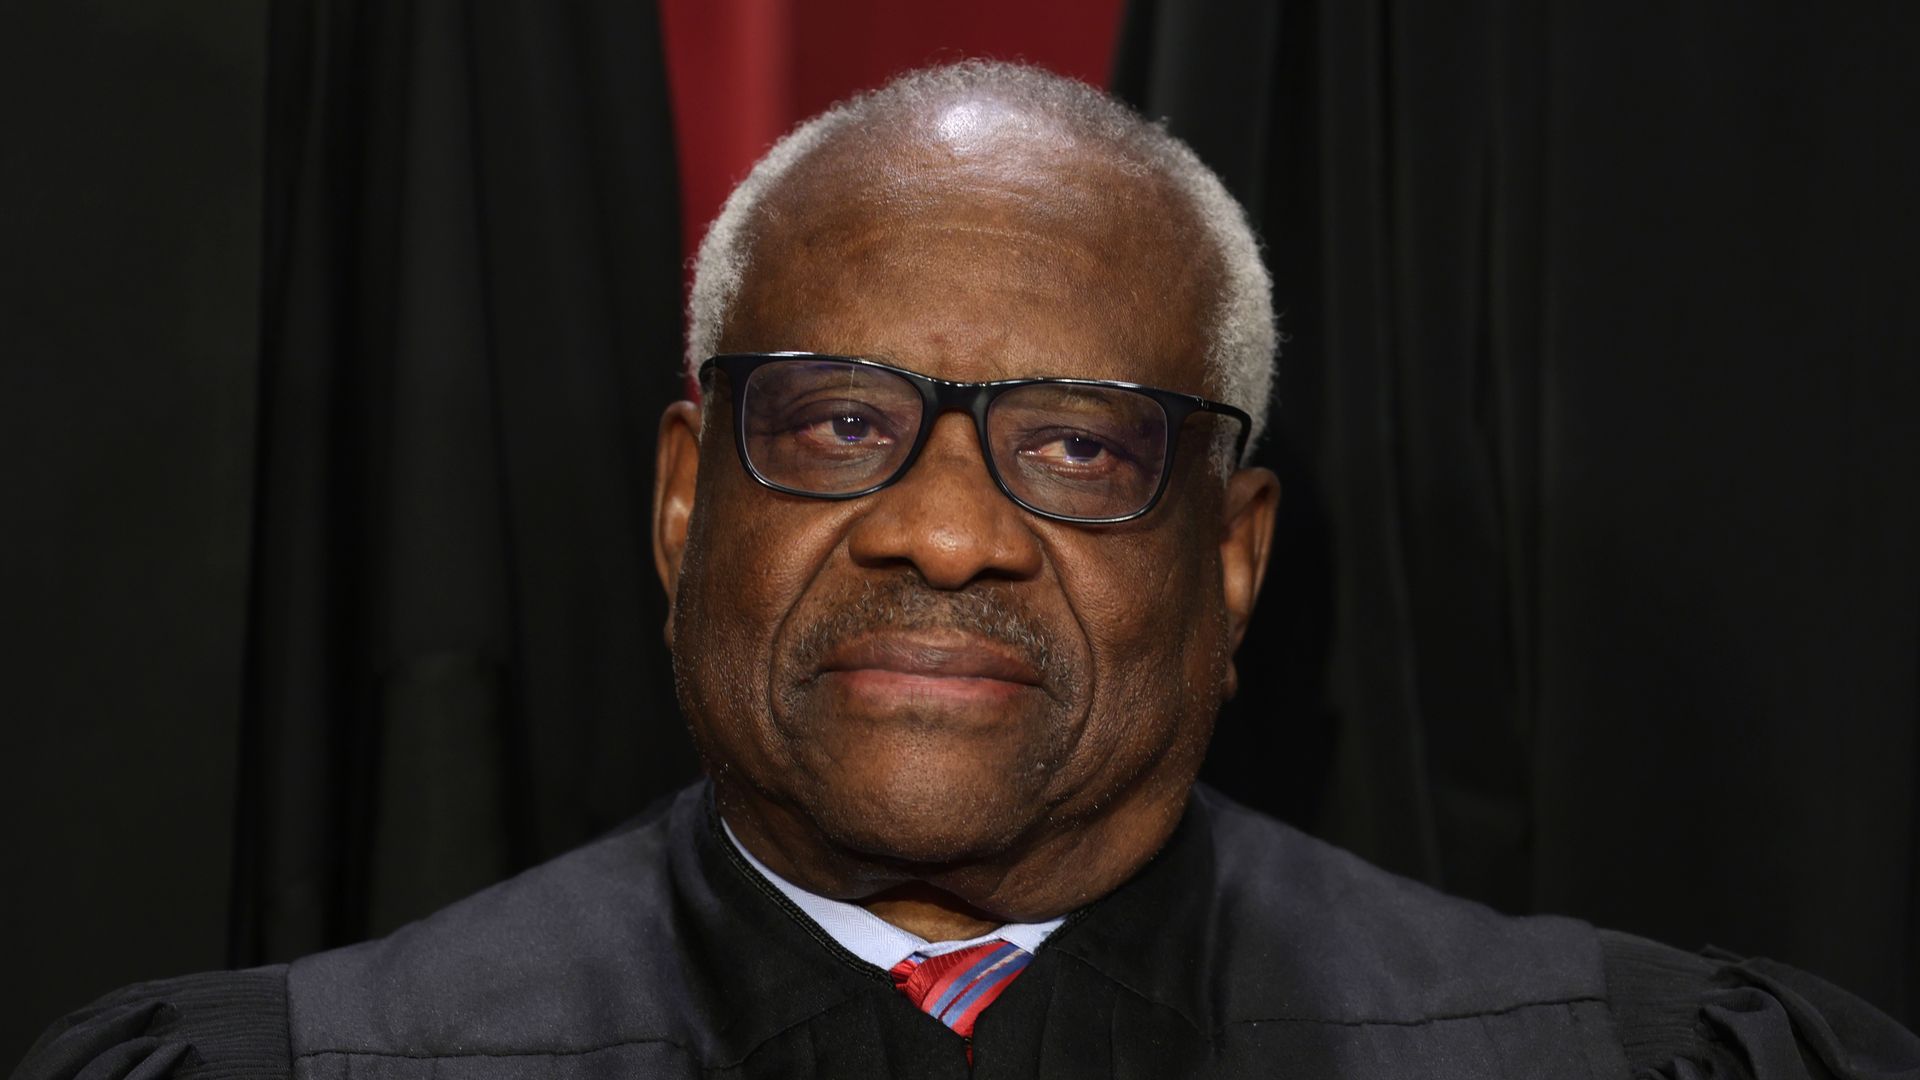 Justice Clarence Thomas poses for an official portrait at the East Conference Room 